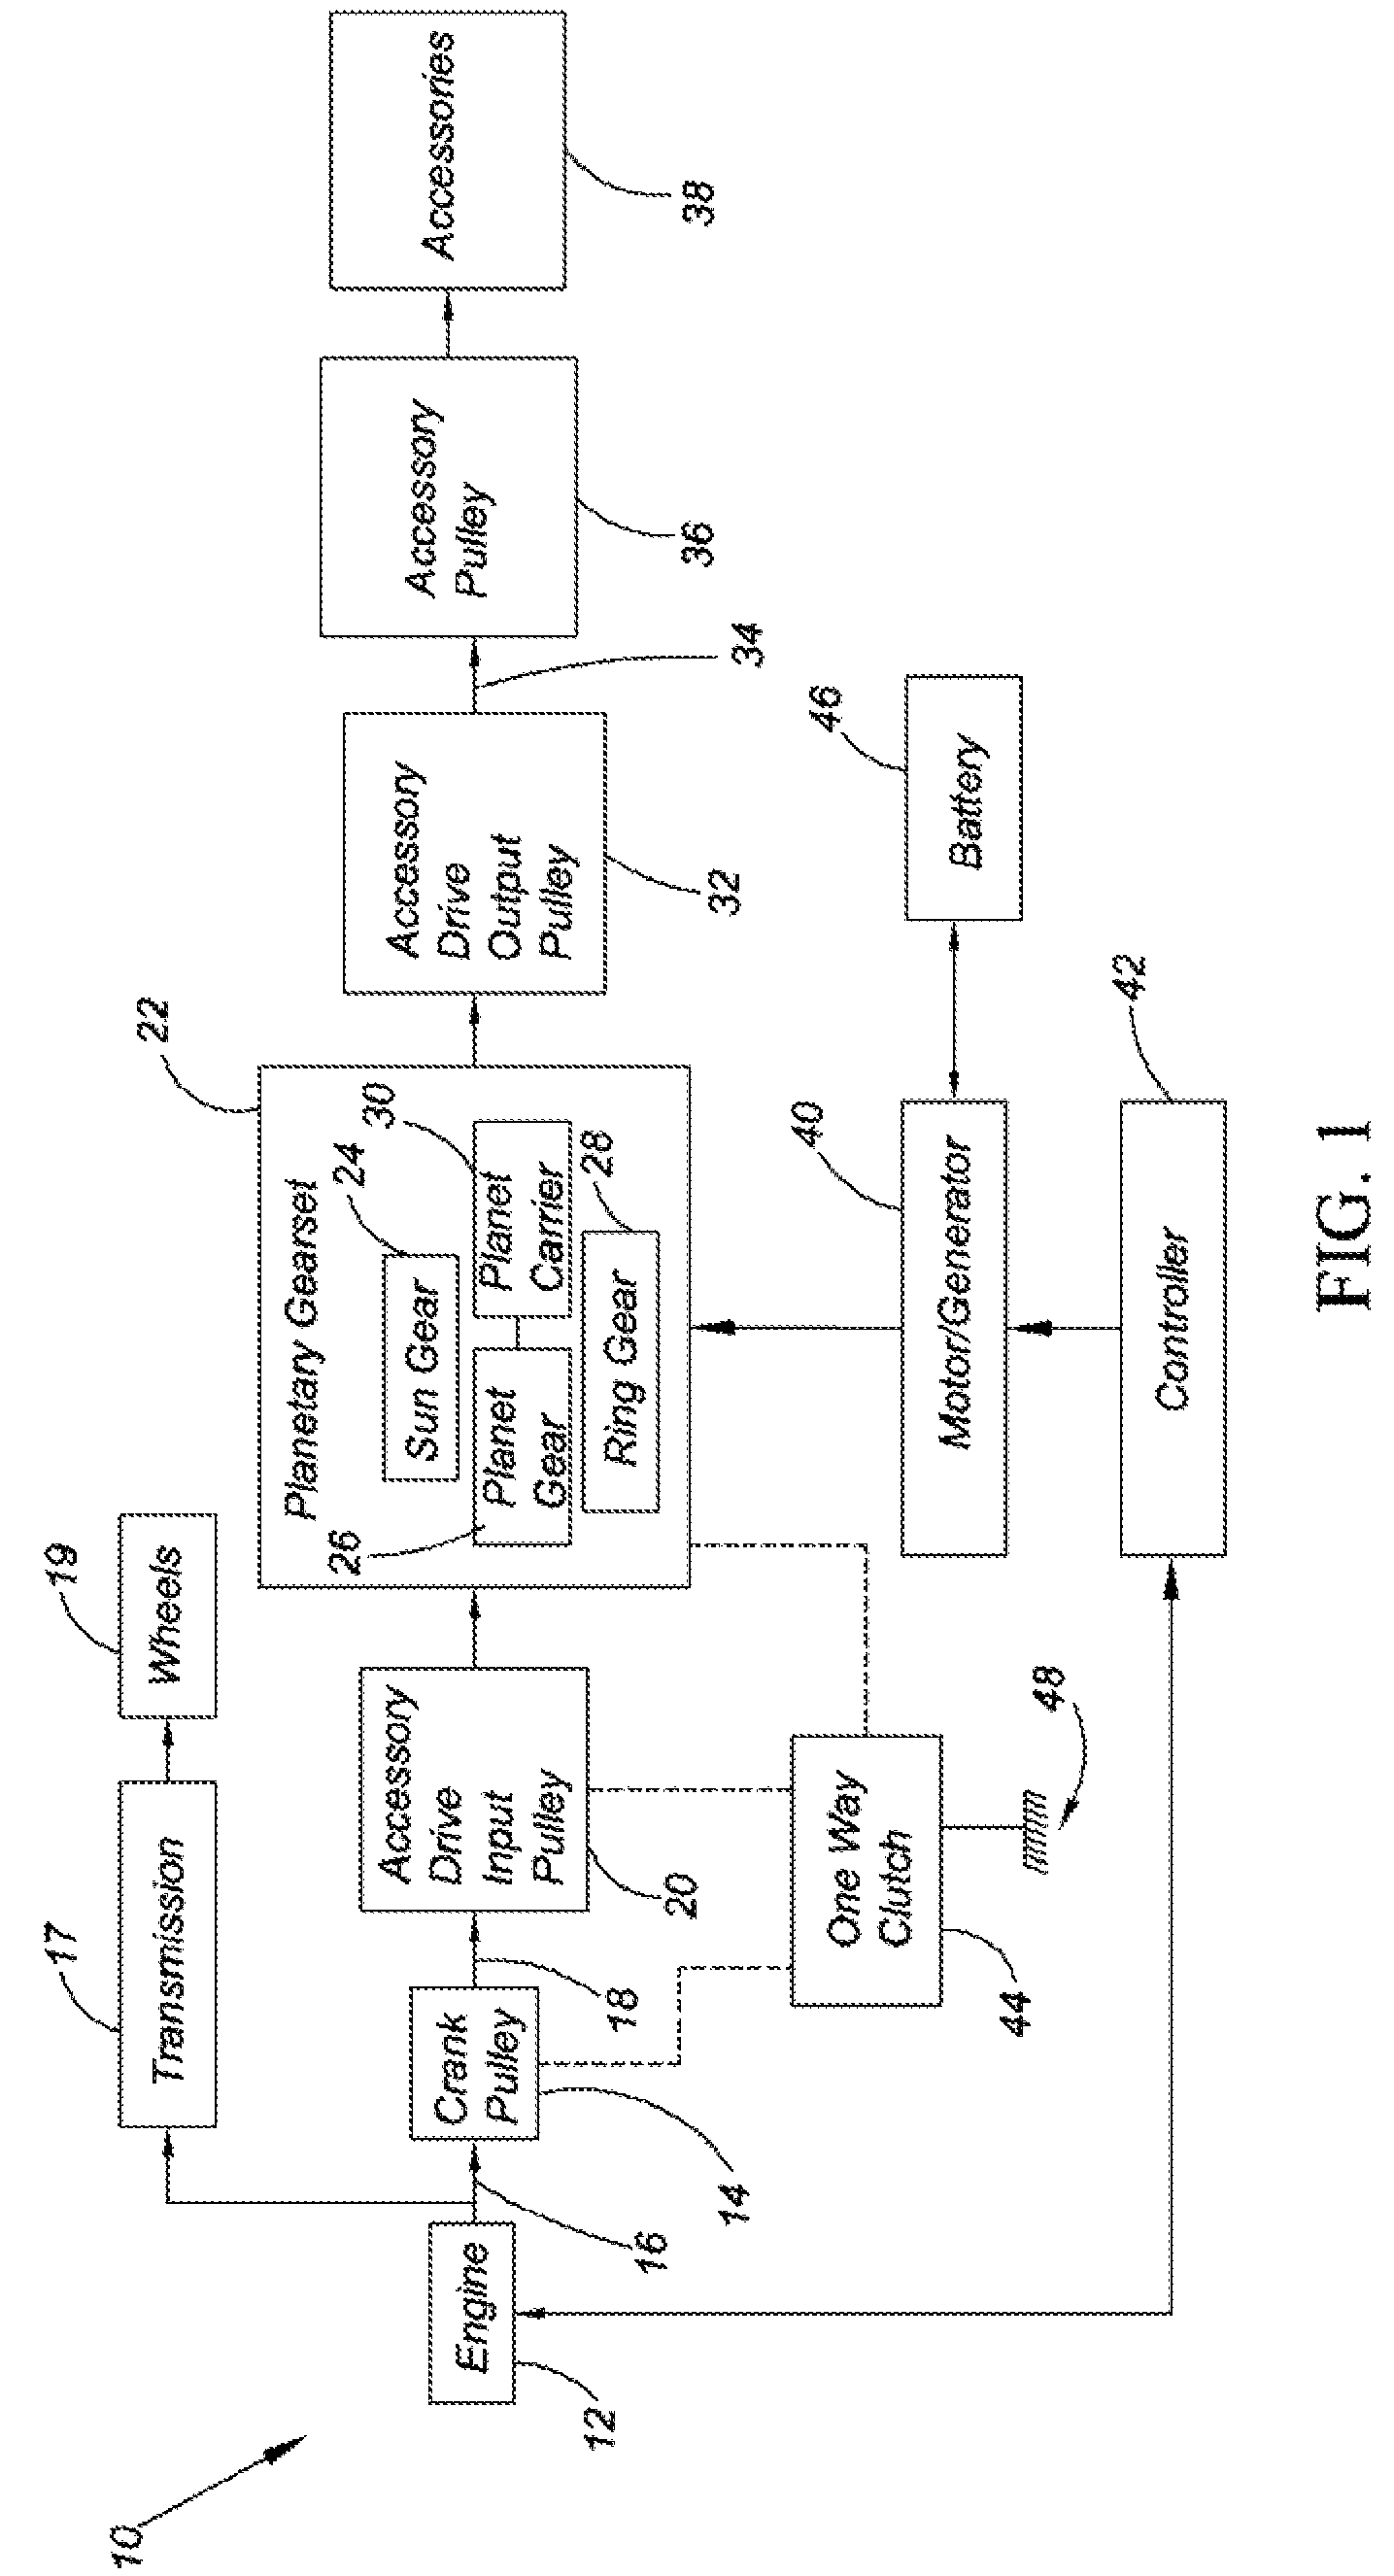 Variable speed accessory drive system for a hybrid vehicle